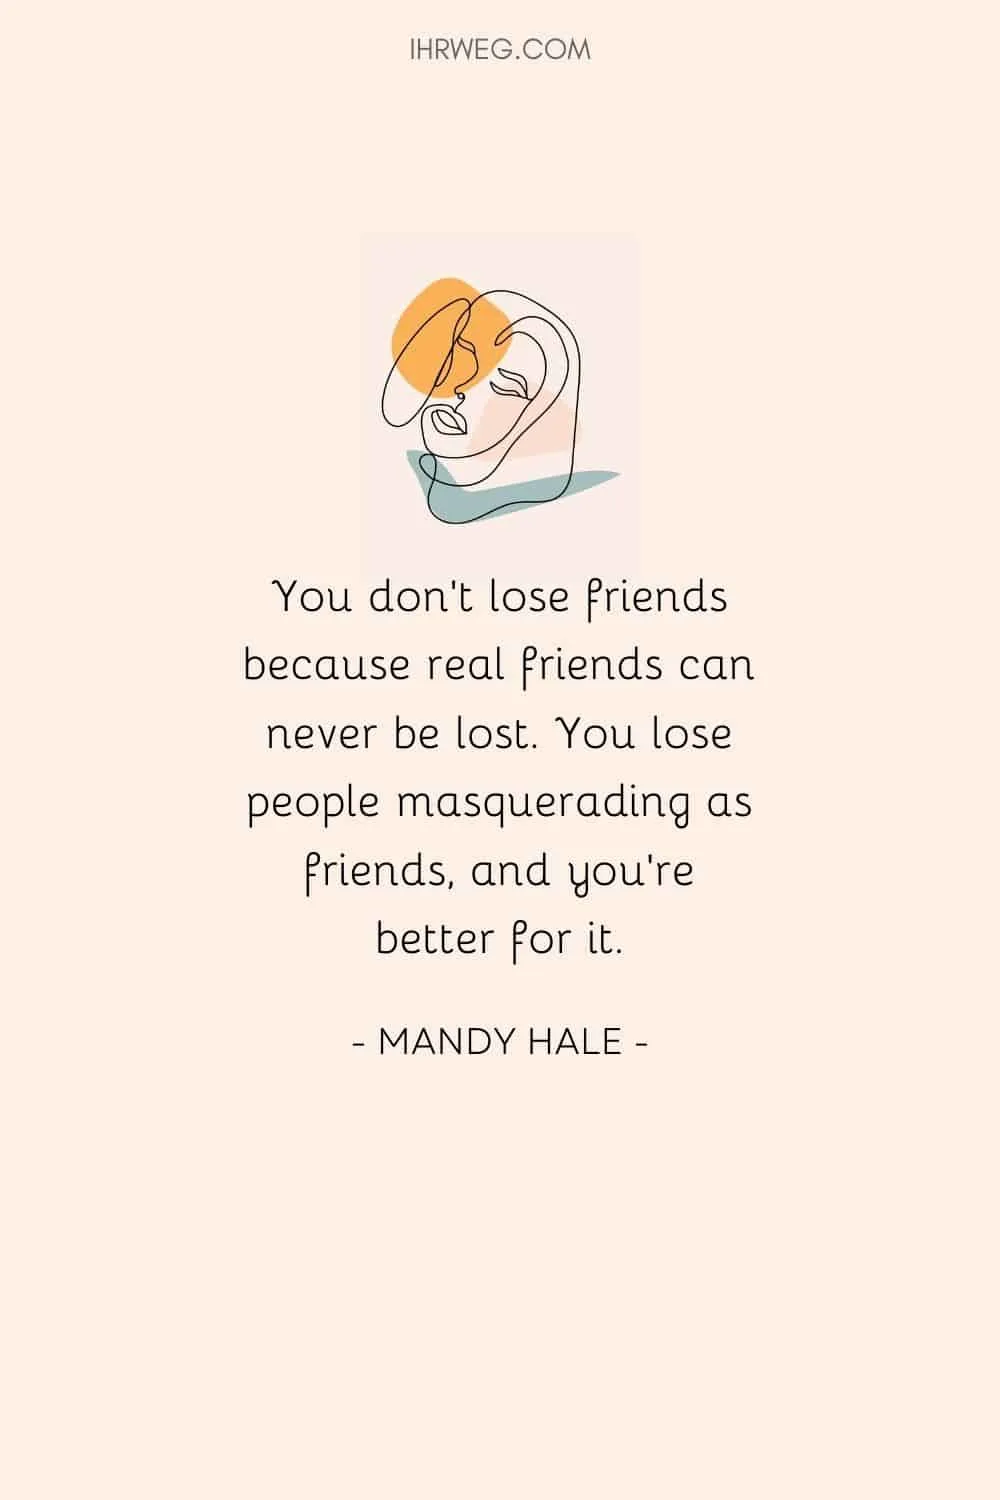 You don’t lose friends because real friends can never be lost